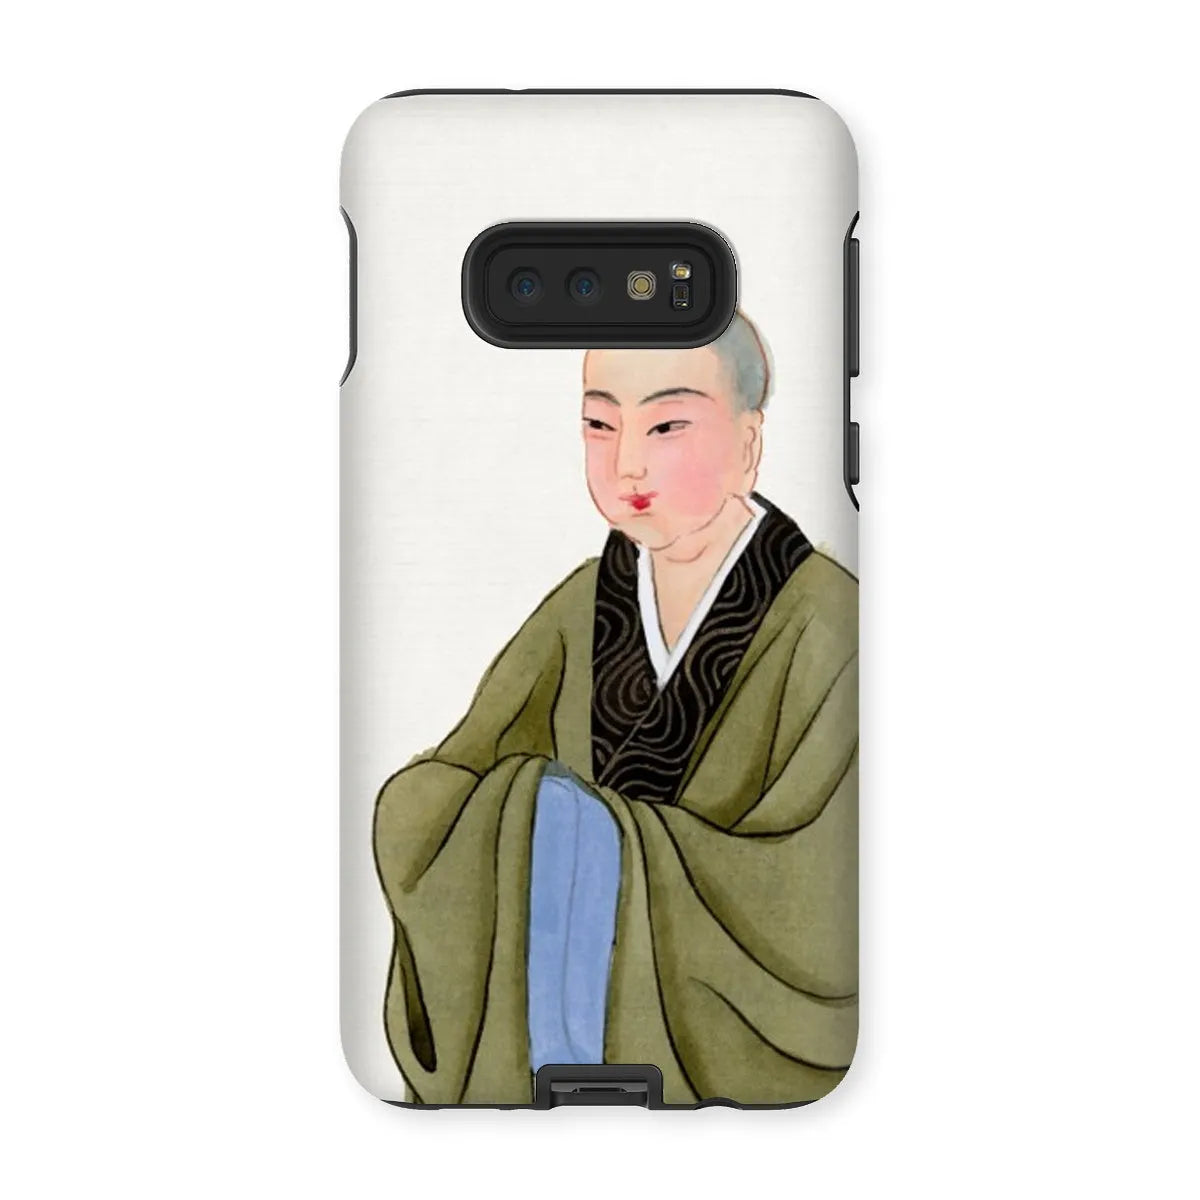 Buddhist Monk - Manchu Chinese Aesthetic Art Phone Case - Samsung Galaxy S10e / Matte - Mobile Phone Cases - Aesthetic